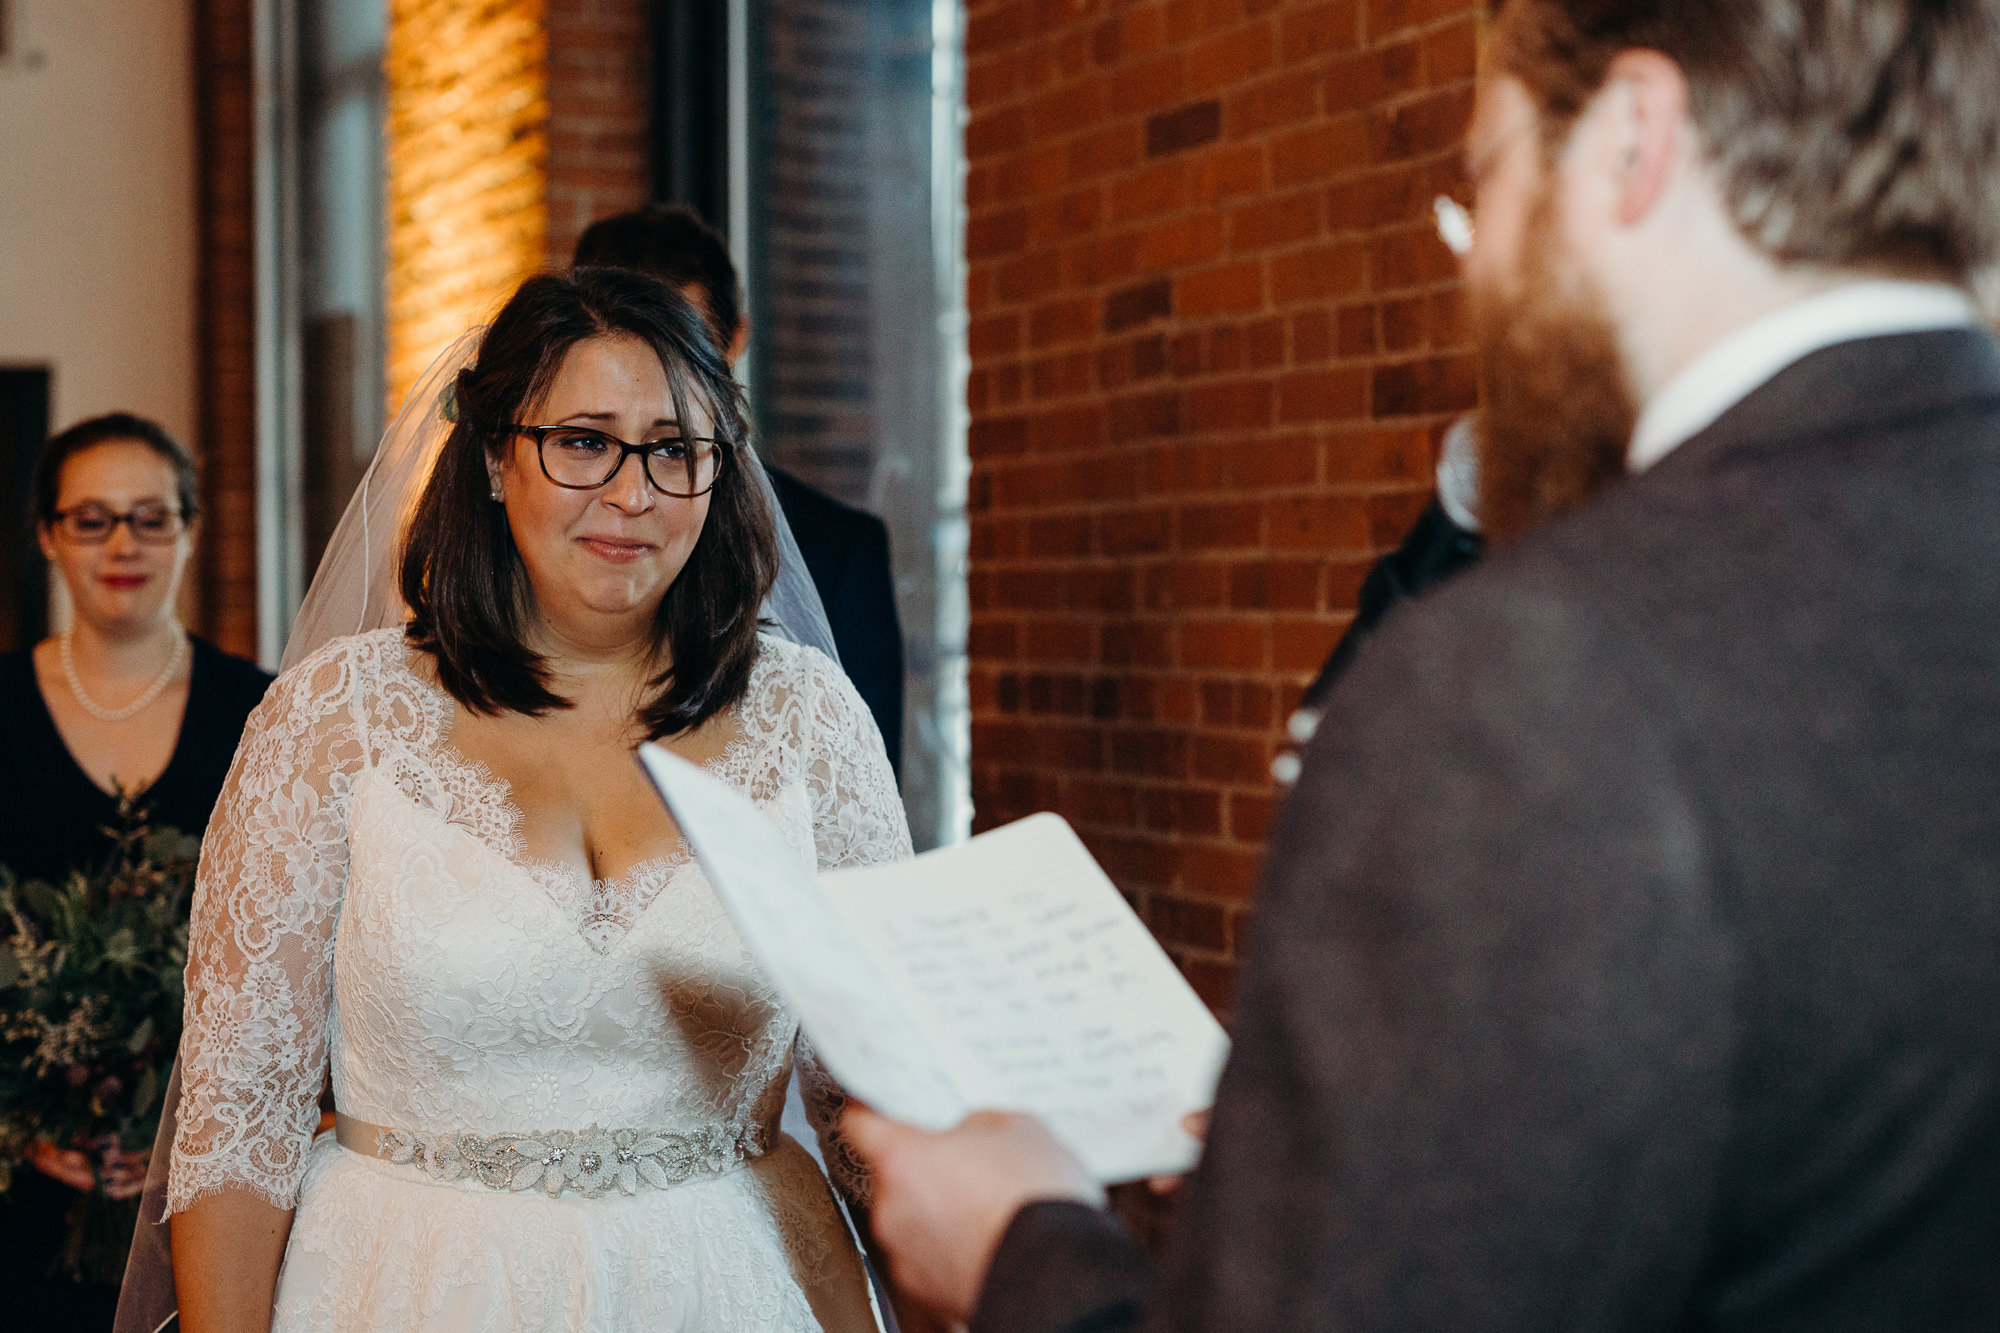 a bride wipes away tears during her wedding vows at dumbo loft in brooklyn, ny